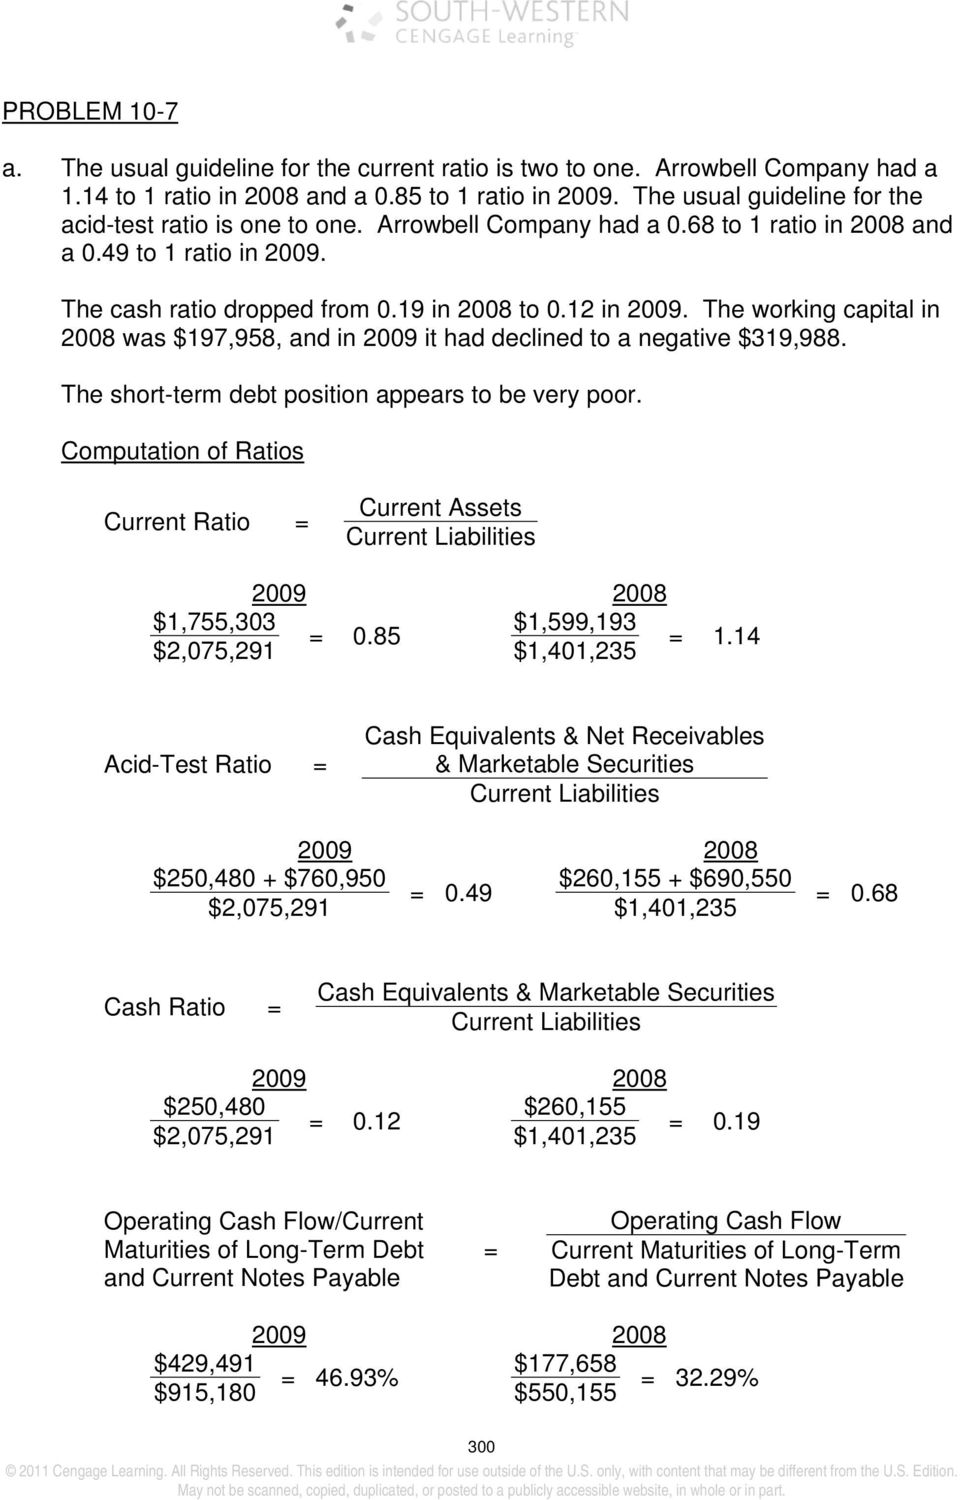 The working capital in 2008 was $197,958, and in 2009 it had declined to a negative $319,988. The short-term debt position appears to be very poor.